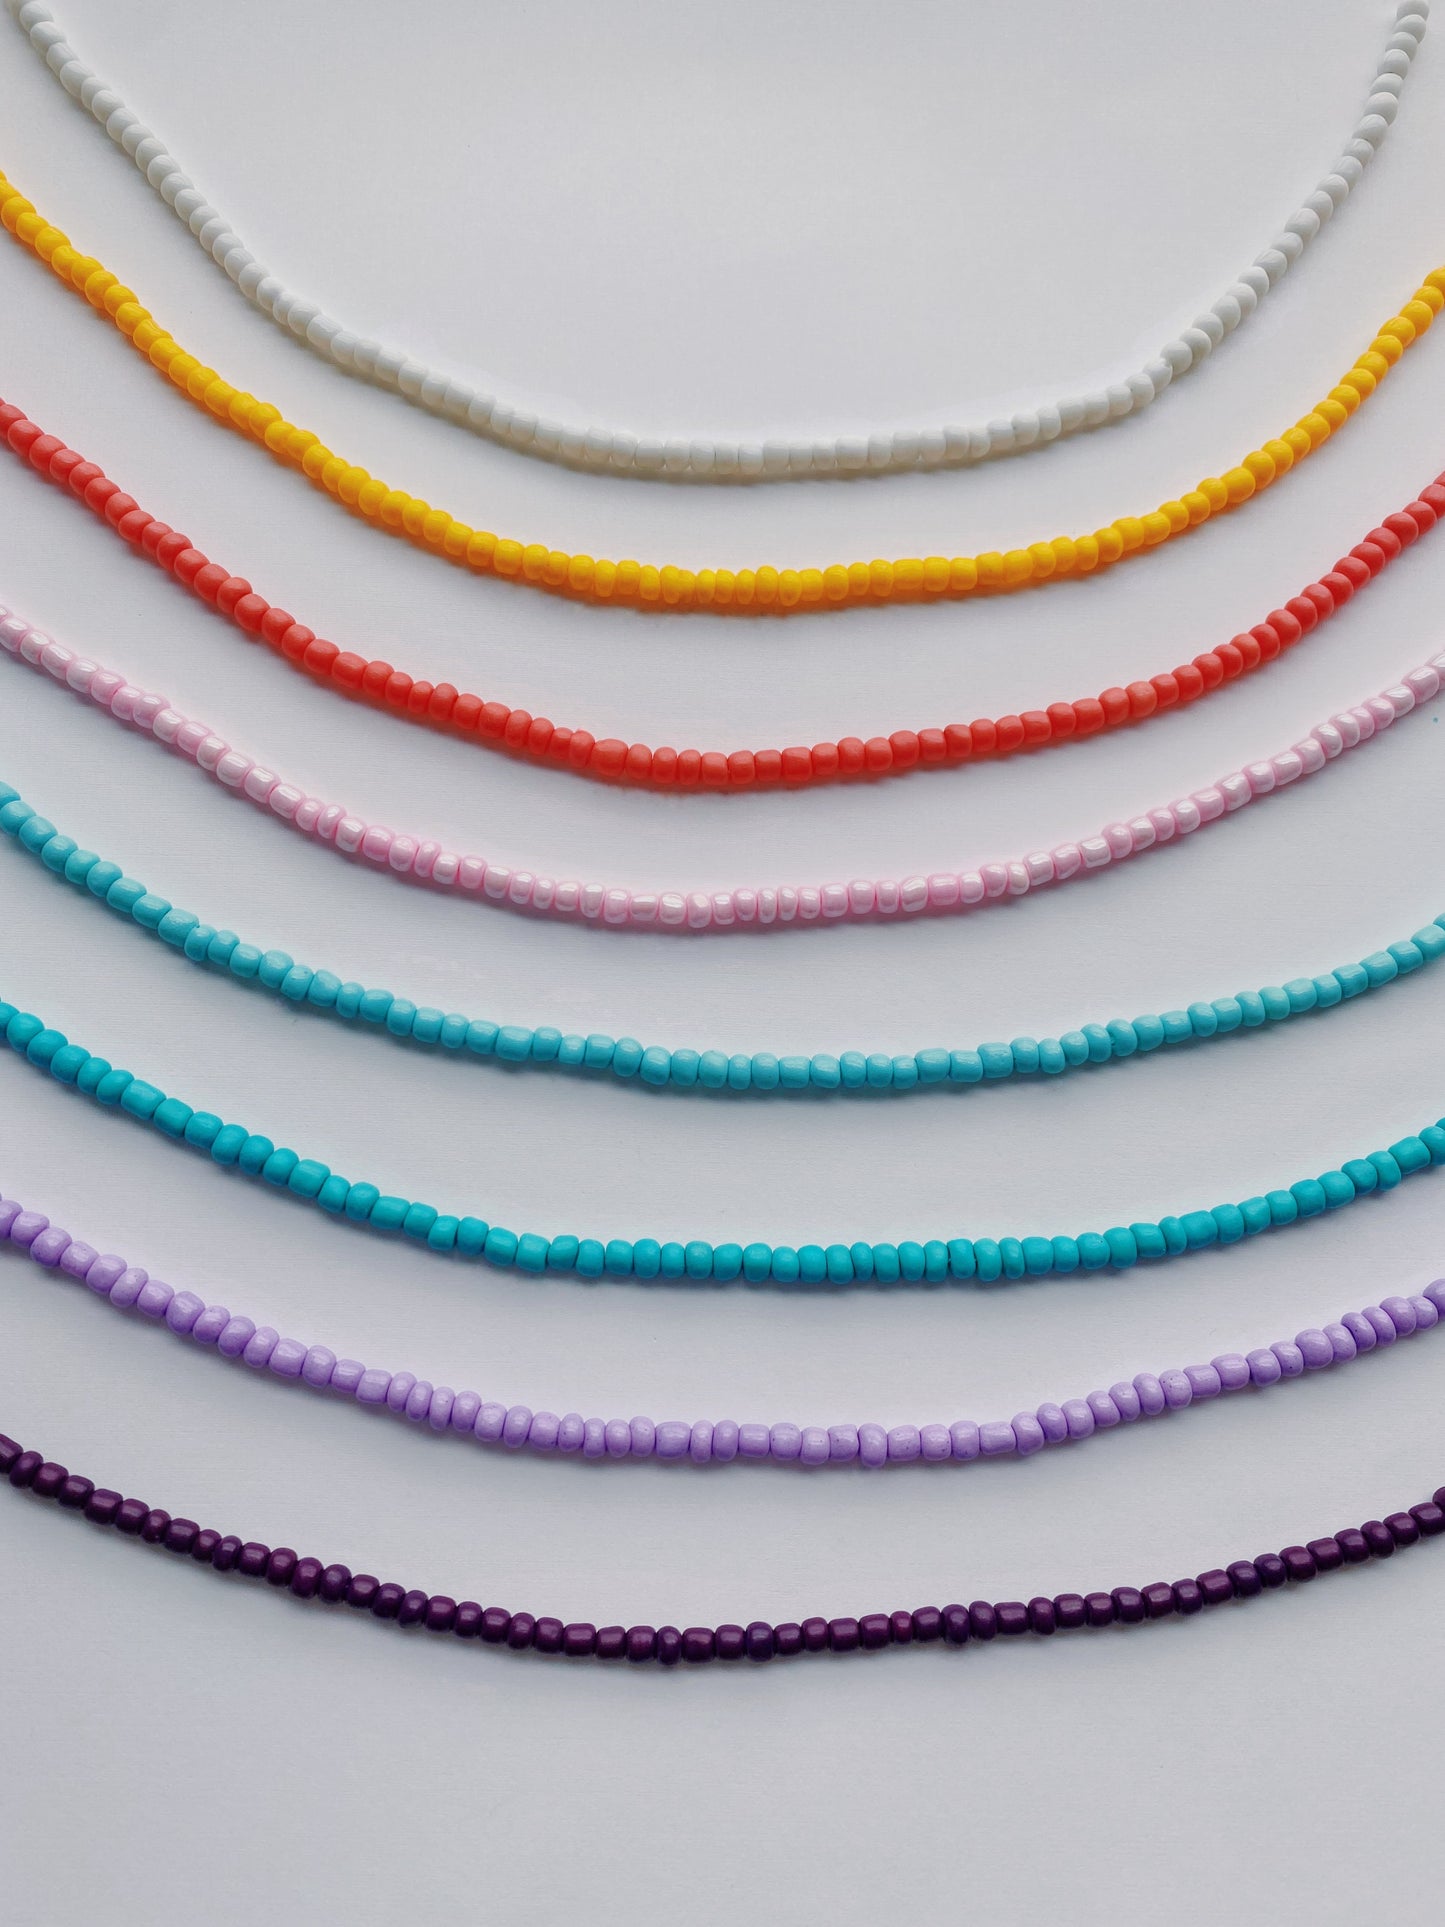 Solid bead choker necklace